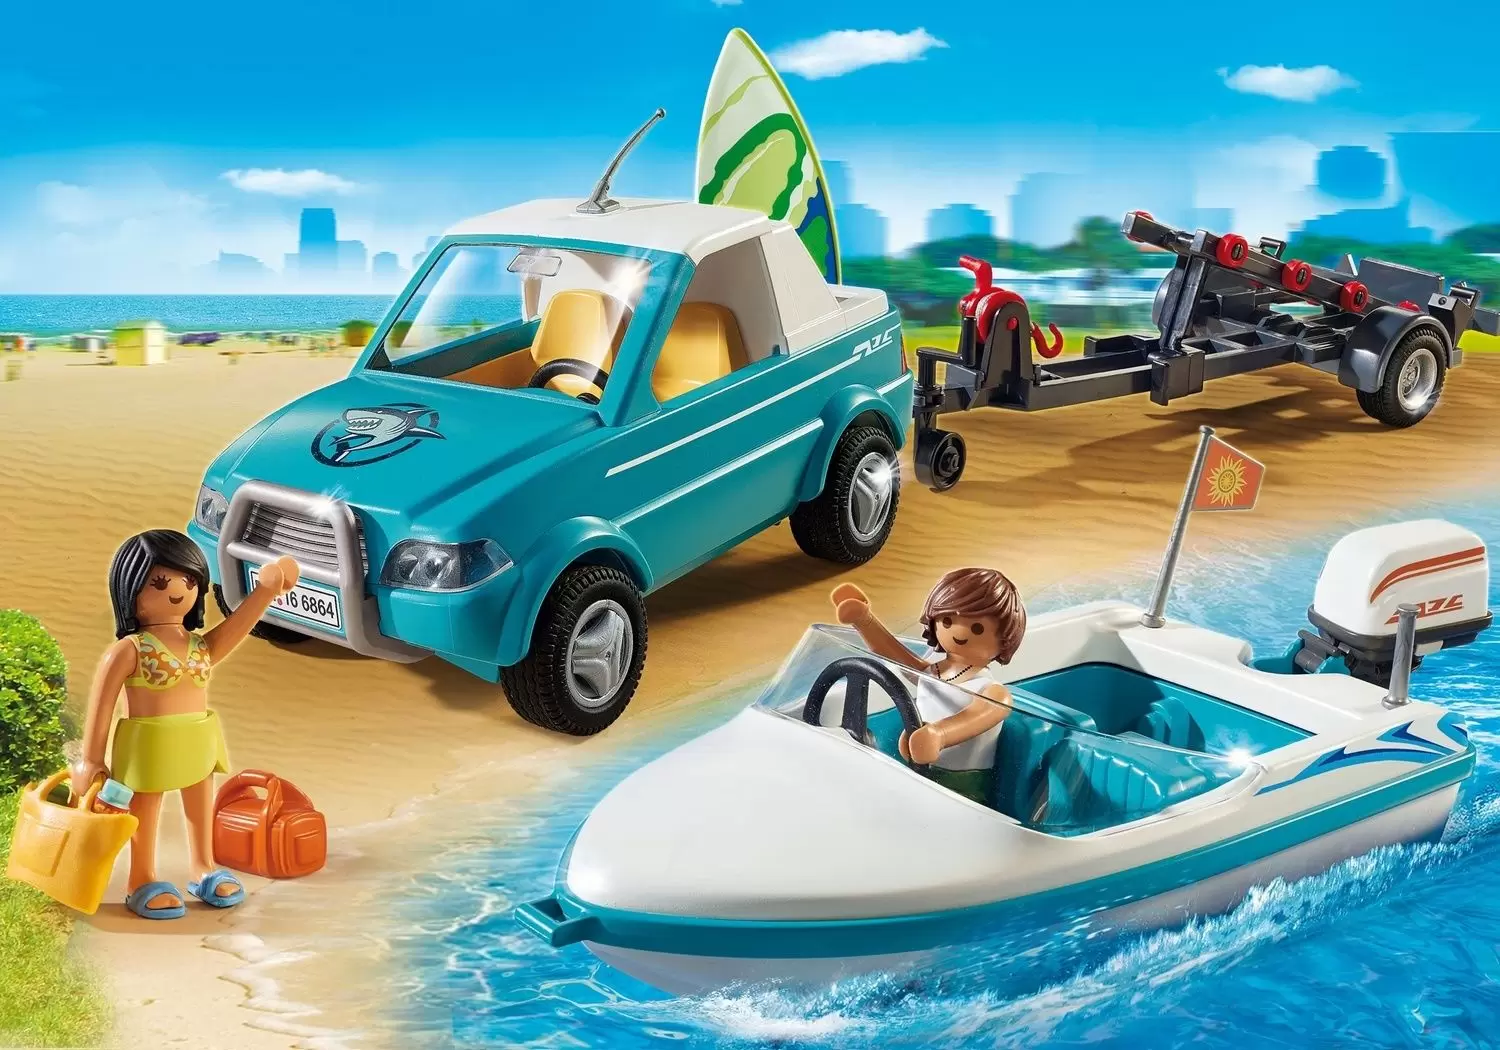 Playmobil Port & Harbour - Surfer pickup with speedboat